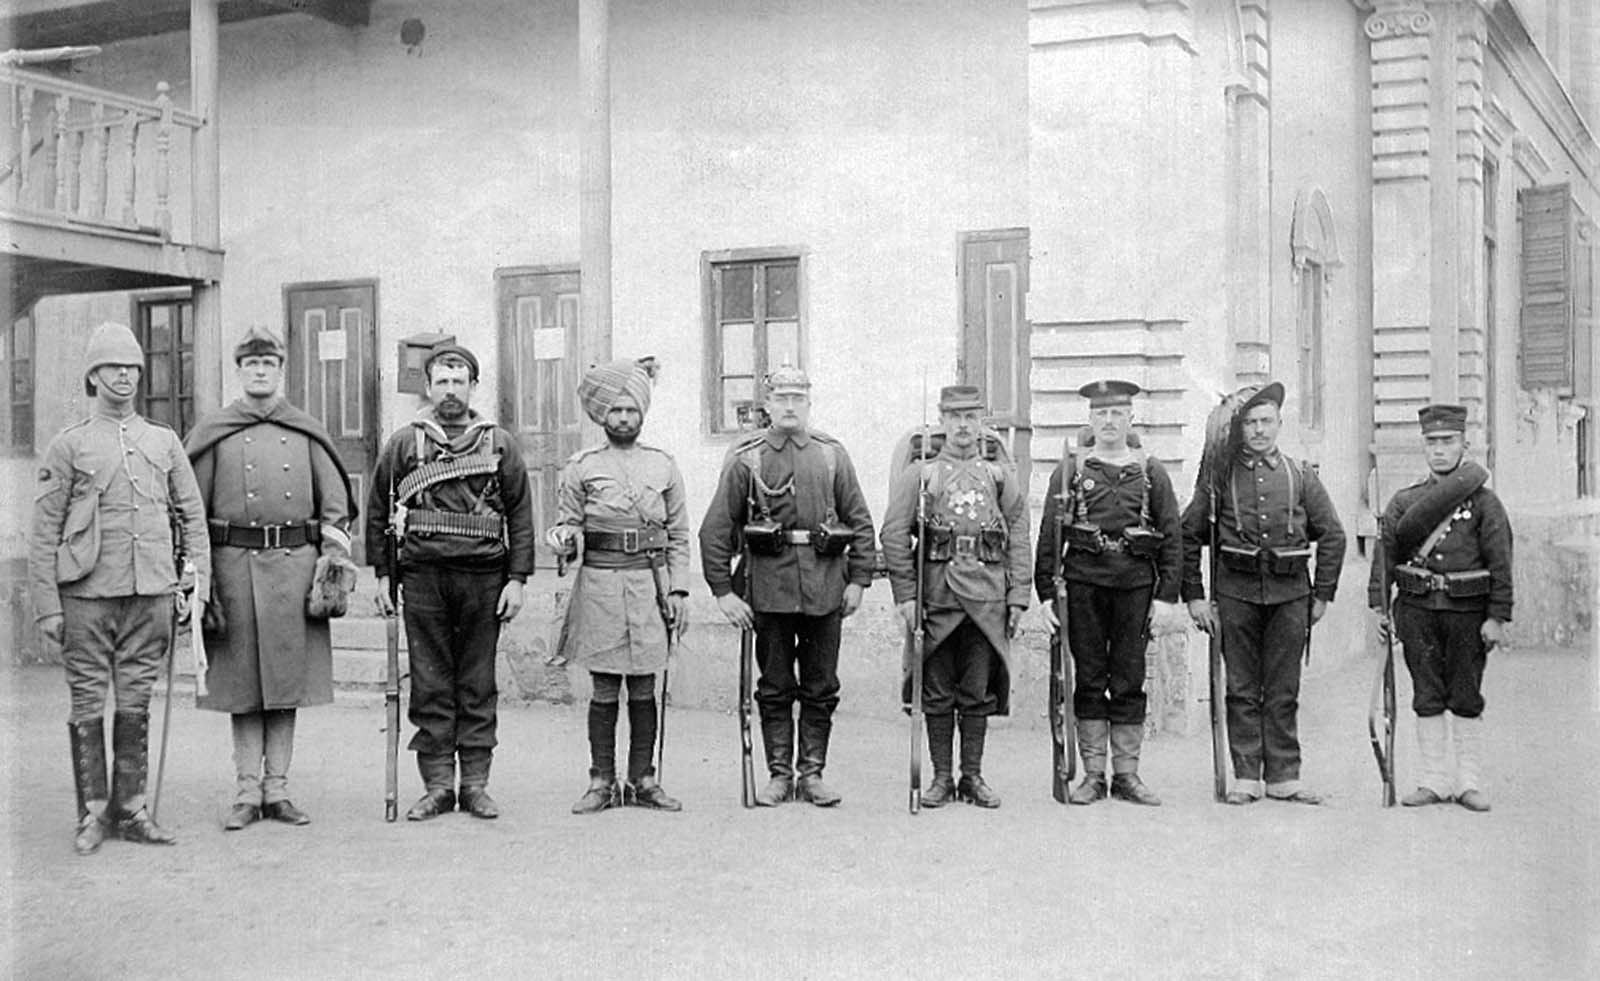 Troops_of_the_Eight_nations_alliance_1900.jpg